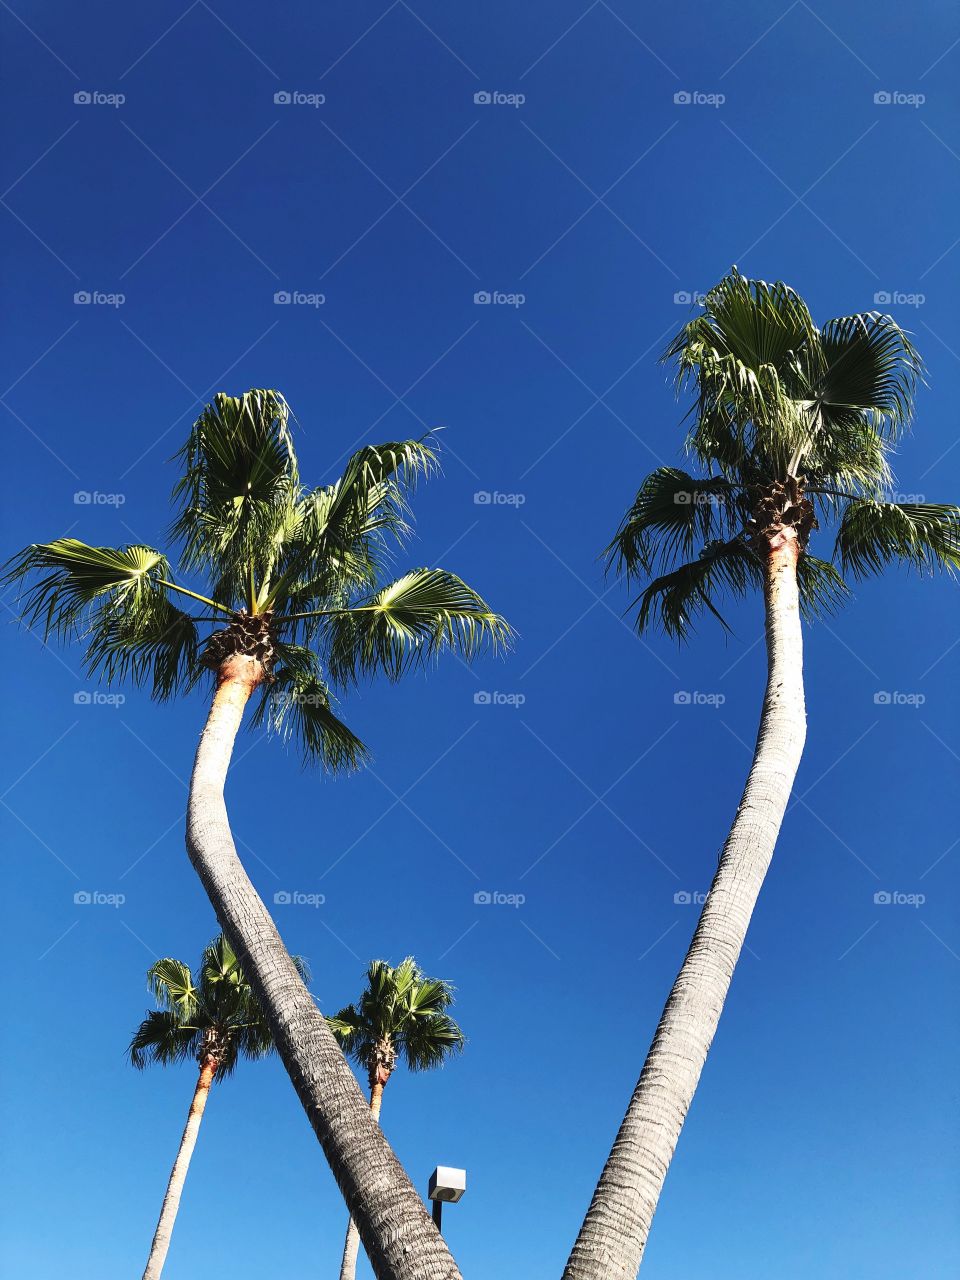 Palm tees with blue skies